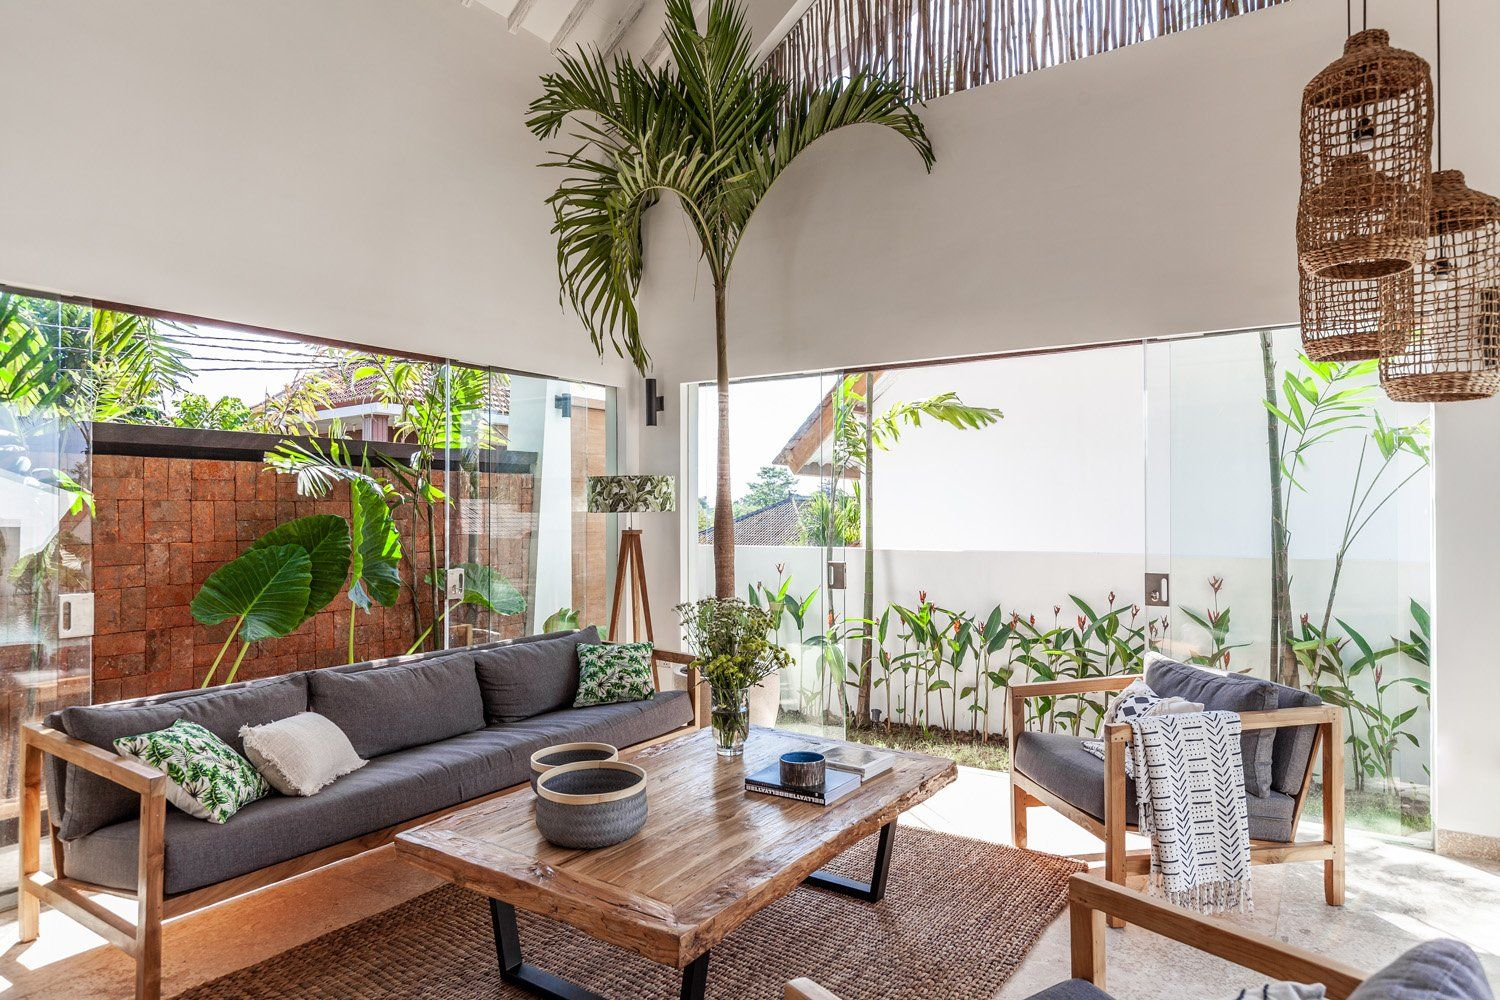 Living room with plants inside and out